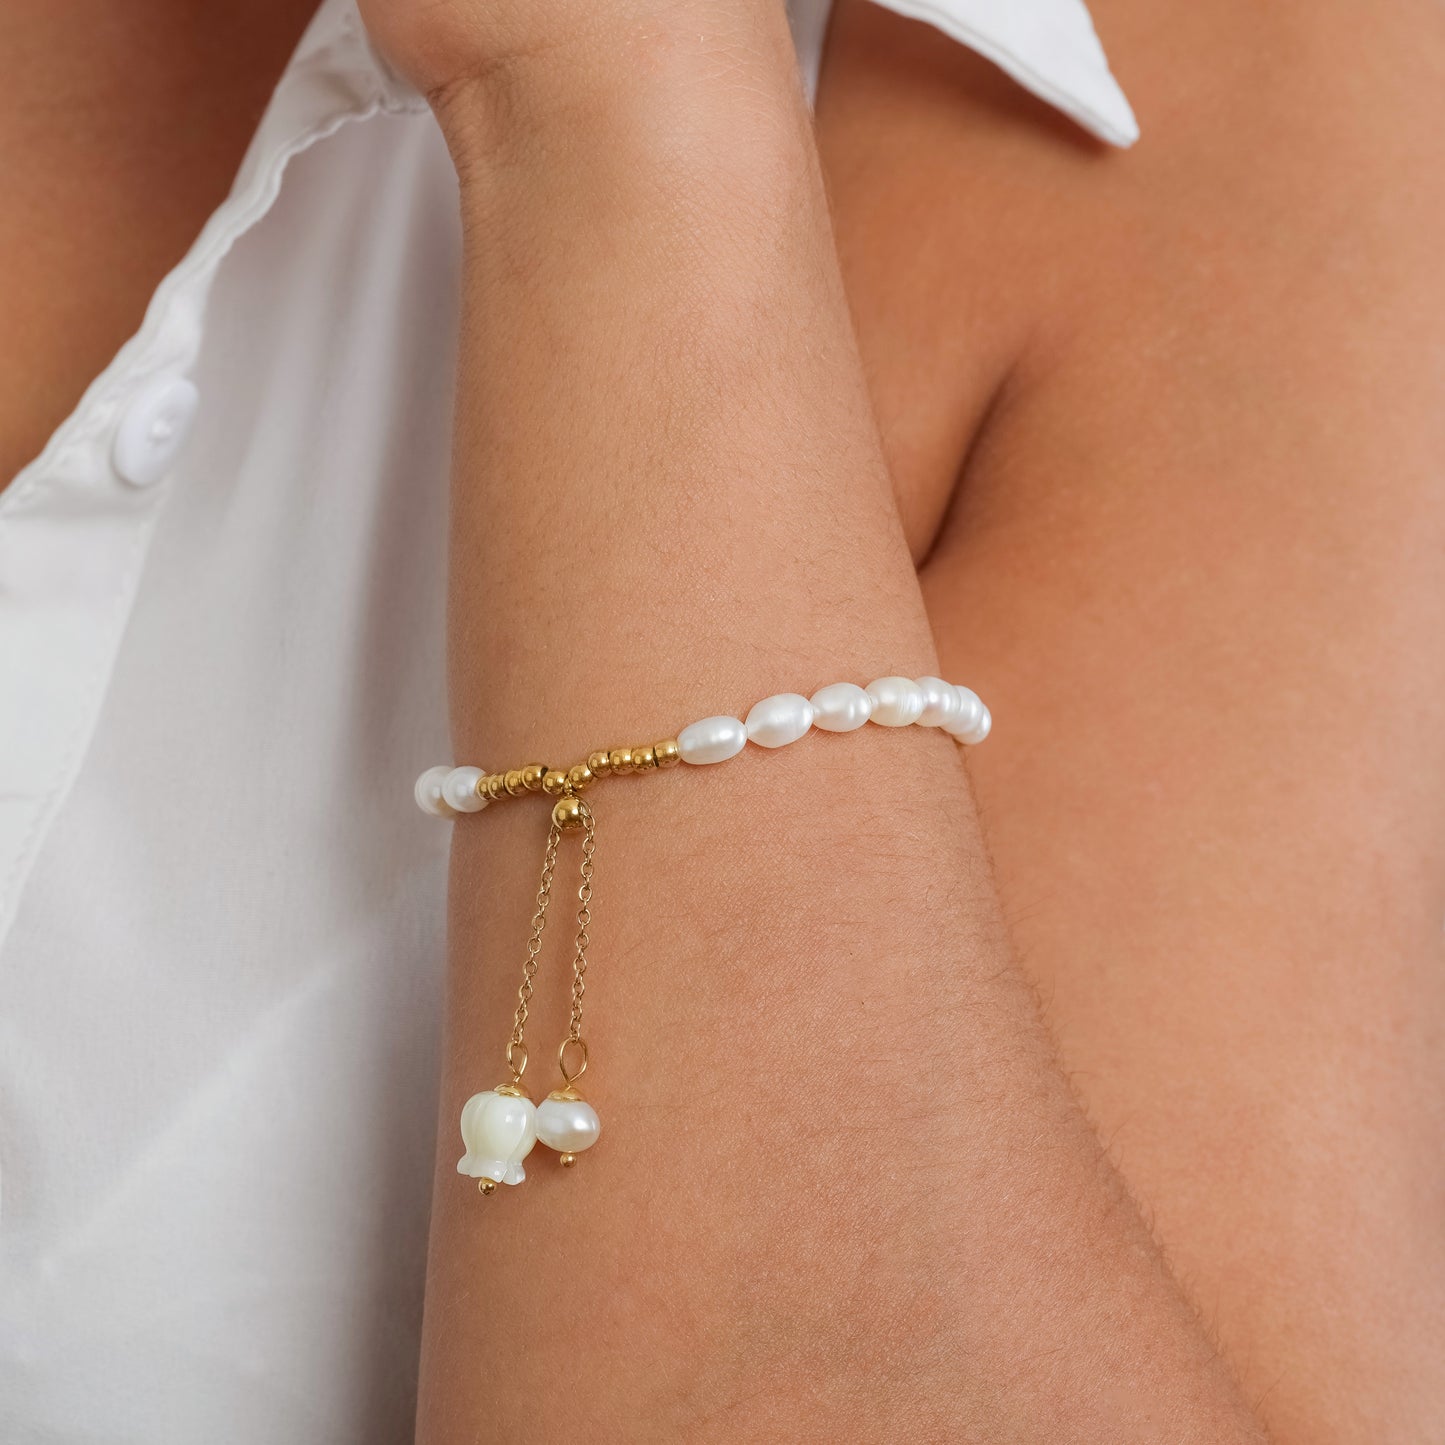 A model in a white sleeveless top wearing Lily of the Valley Pearl bracelet on her wrist. Close-up image of the bracelet.